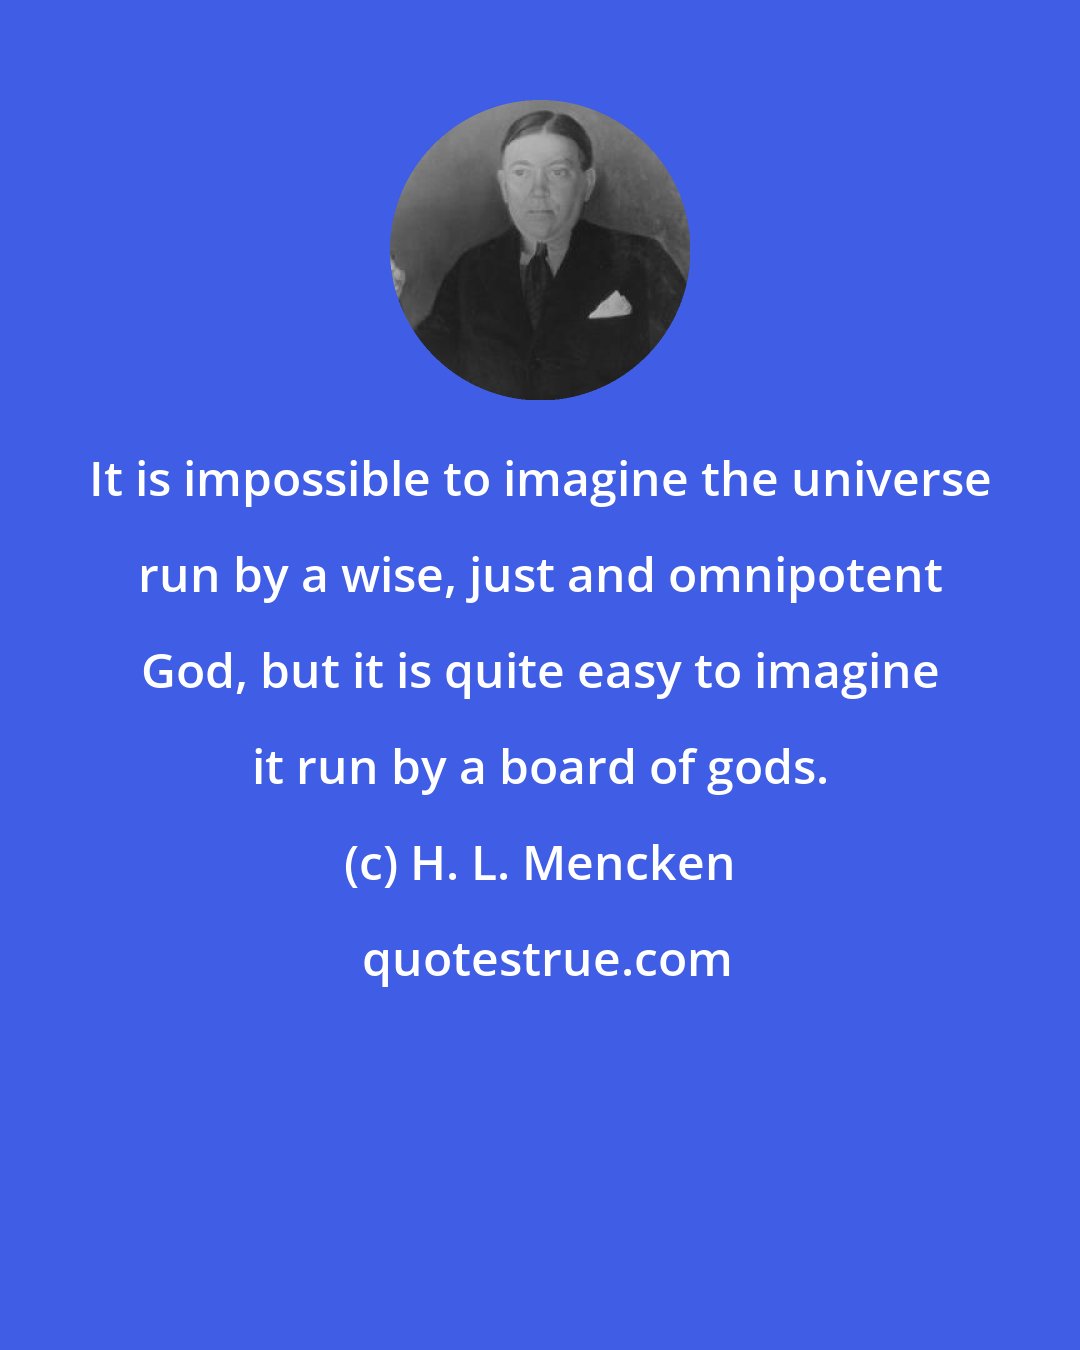 H. L. Mencken: It is impossible to imagine the universe run by a wise, just and omnipotent God, but it is quite easy to imagine it run by a board of gods.